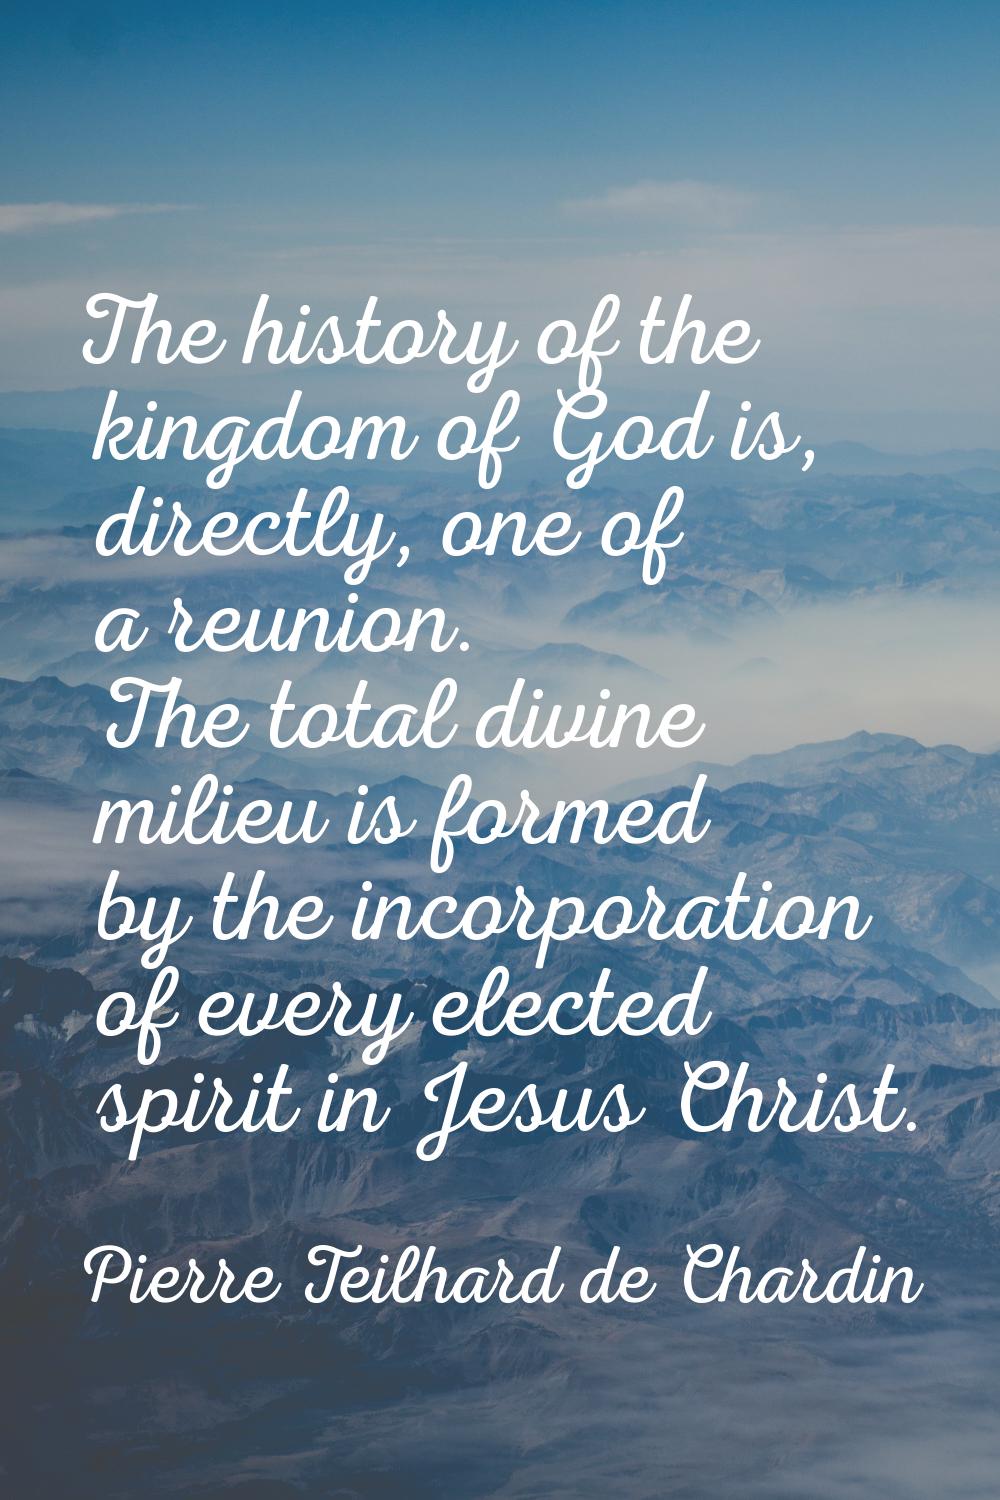 The history of the kingdom of God is, directly, one of a reunion. The total divine milieu is formed